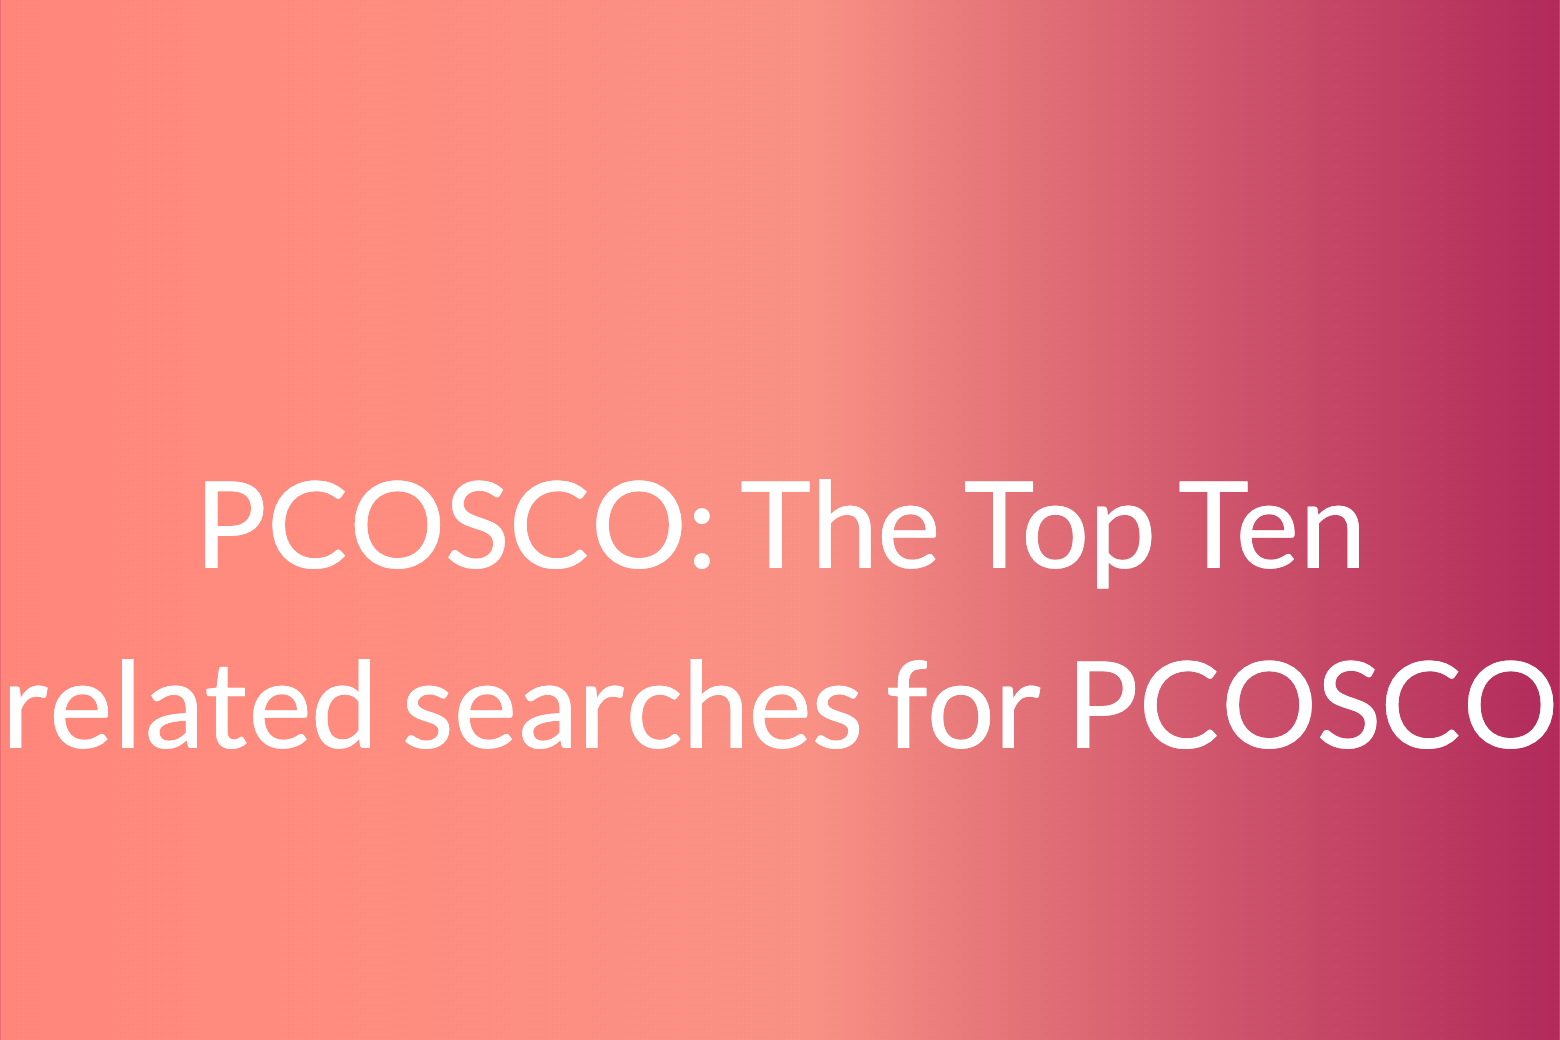 PCOSCO: The top ten related searches for PCOSCO